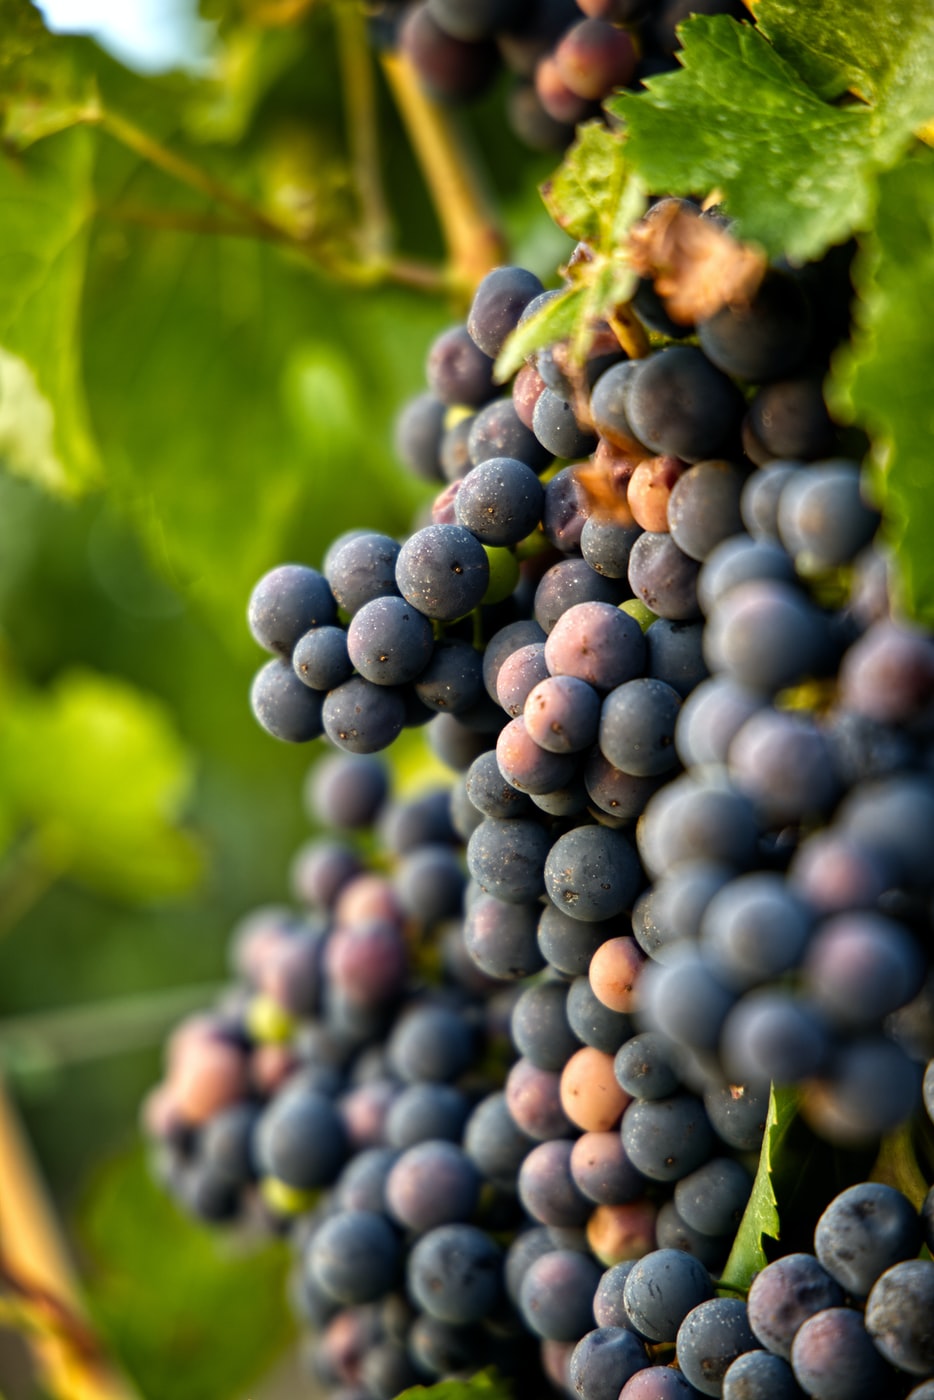 The secrets of a good wine. Why do we need enzymes and yeasts in winemaking?